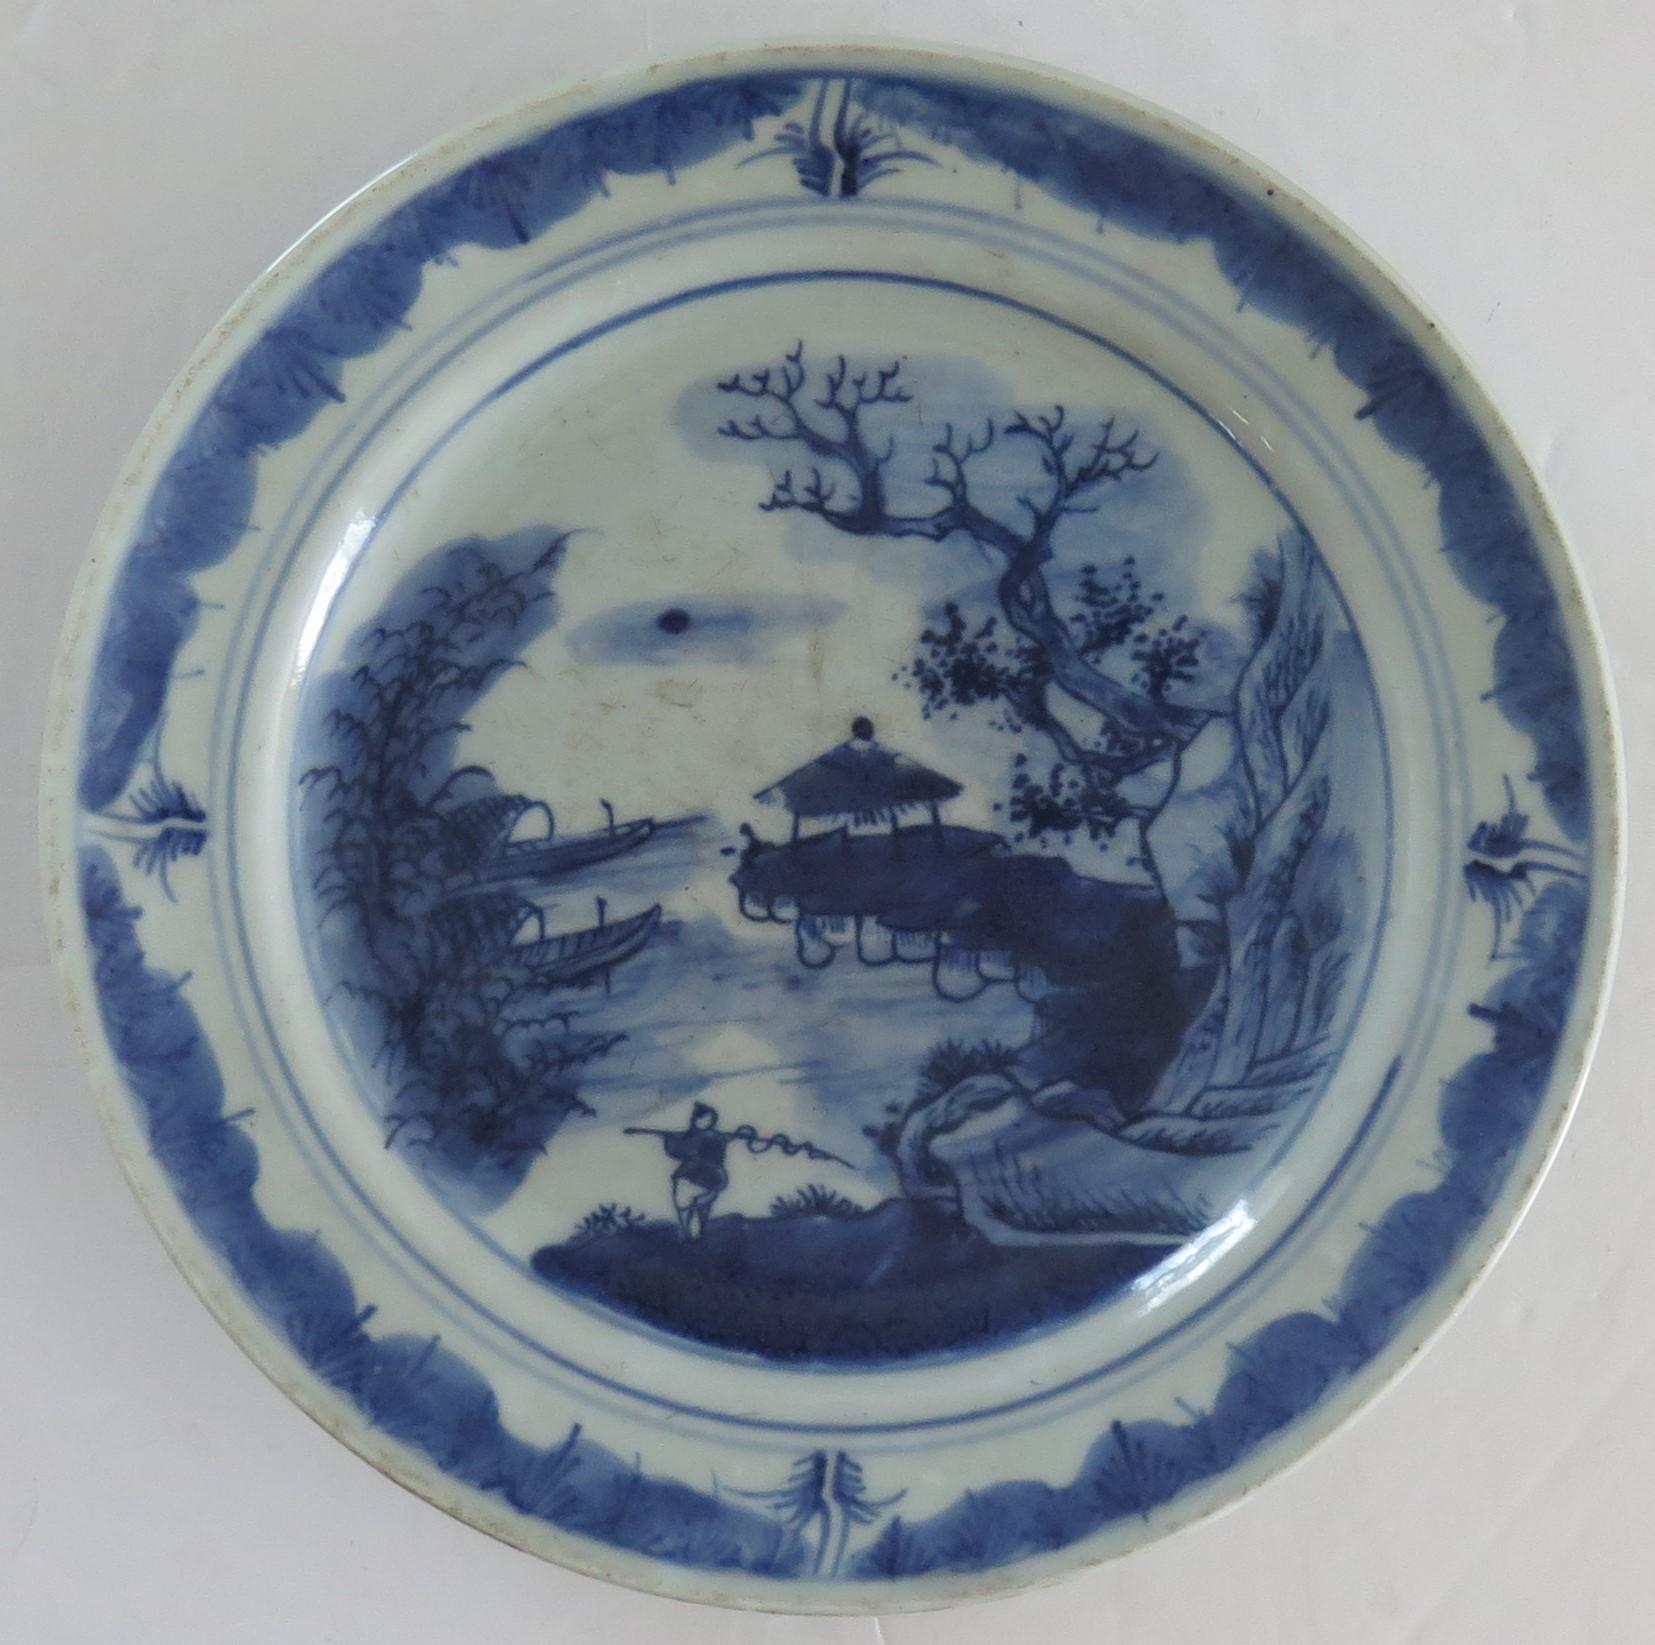 This is a good Chinese porcelain plate or dish with a blue and white, hand painted river scene, which we date to the Qing dynasty, late 18th century.

The dish or plate is fairly heavily potted and raised on a low foot. 

The plate has a light